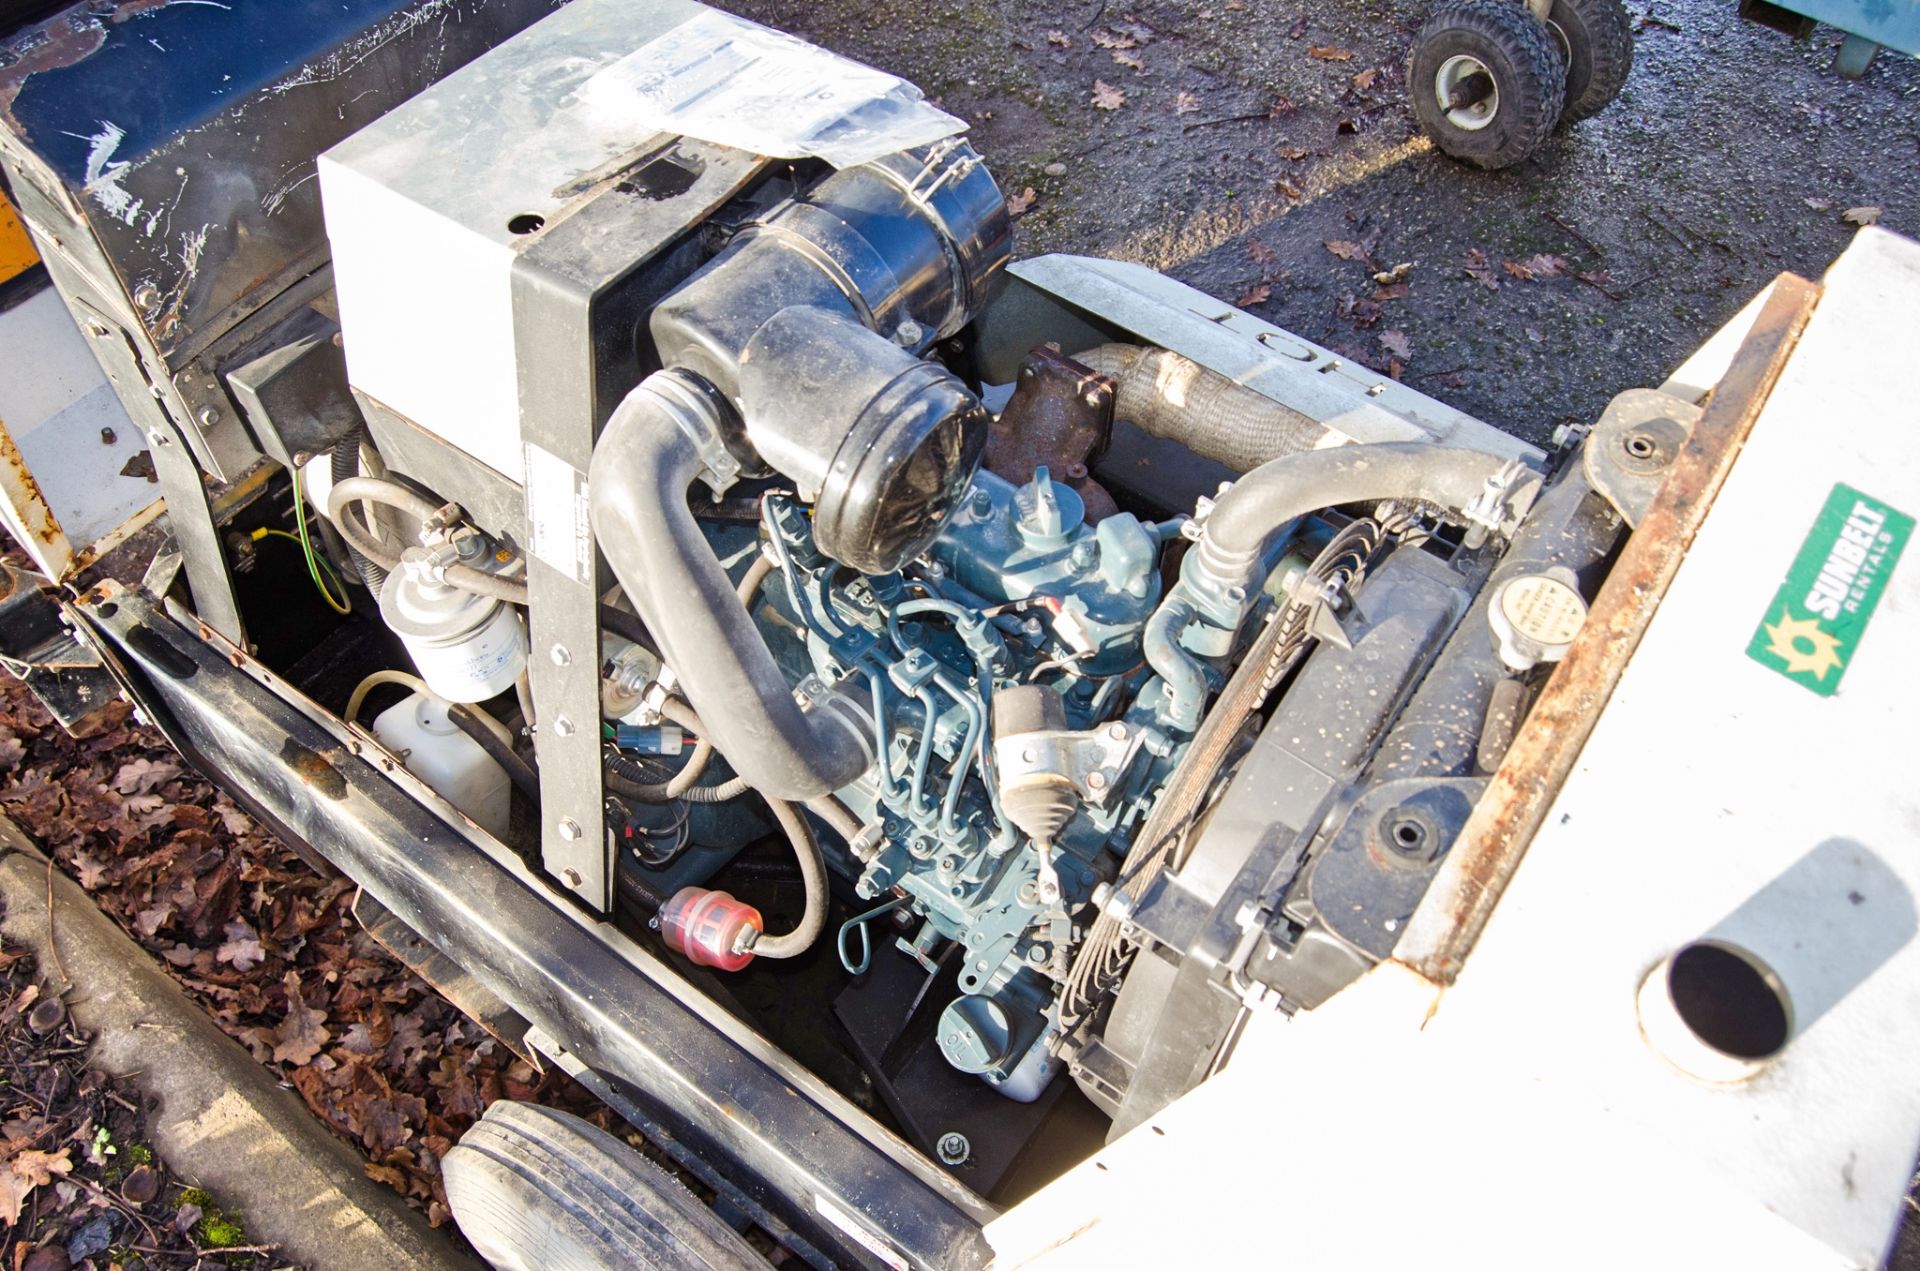 MHM MG10000 SSK-V 10 kva diesel driven generator S/N: 229150122 Recorded hours: 3502 A723472 - Image 4 of 6